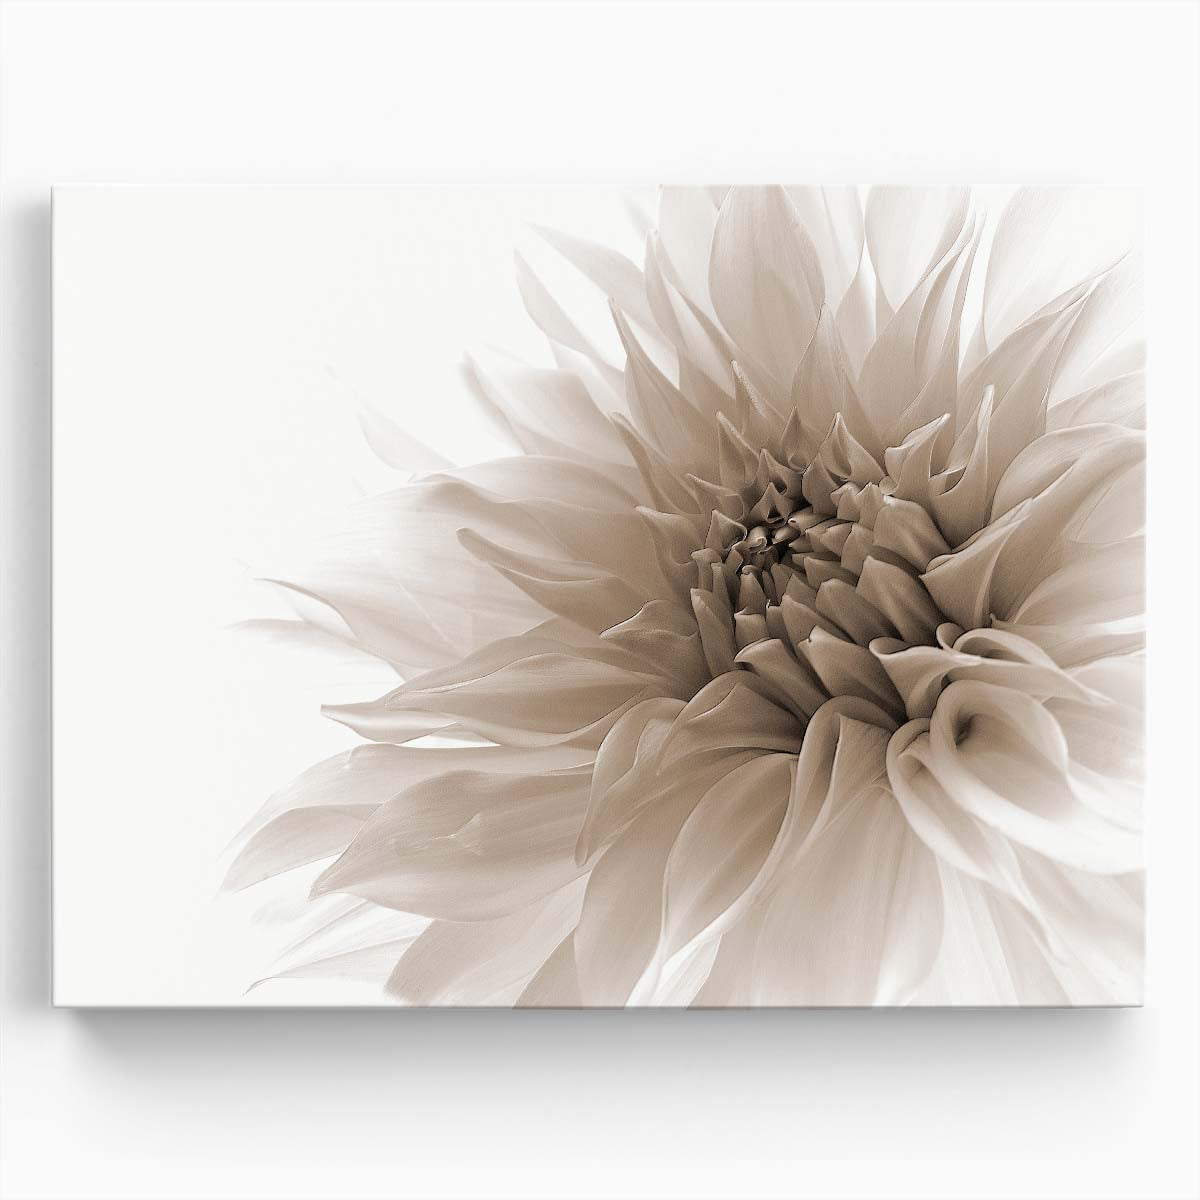 White Dahlia Close-Up Floral Macro Photography Wall Art by Luxuriance Designs. Made in USA.